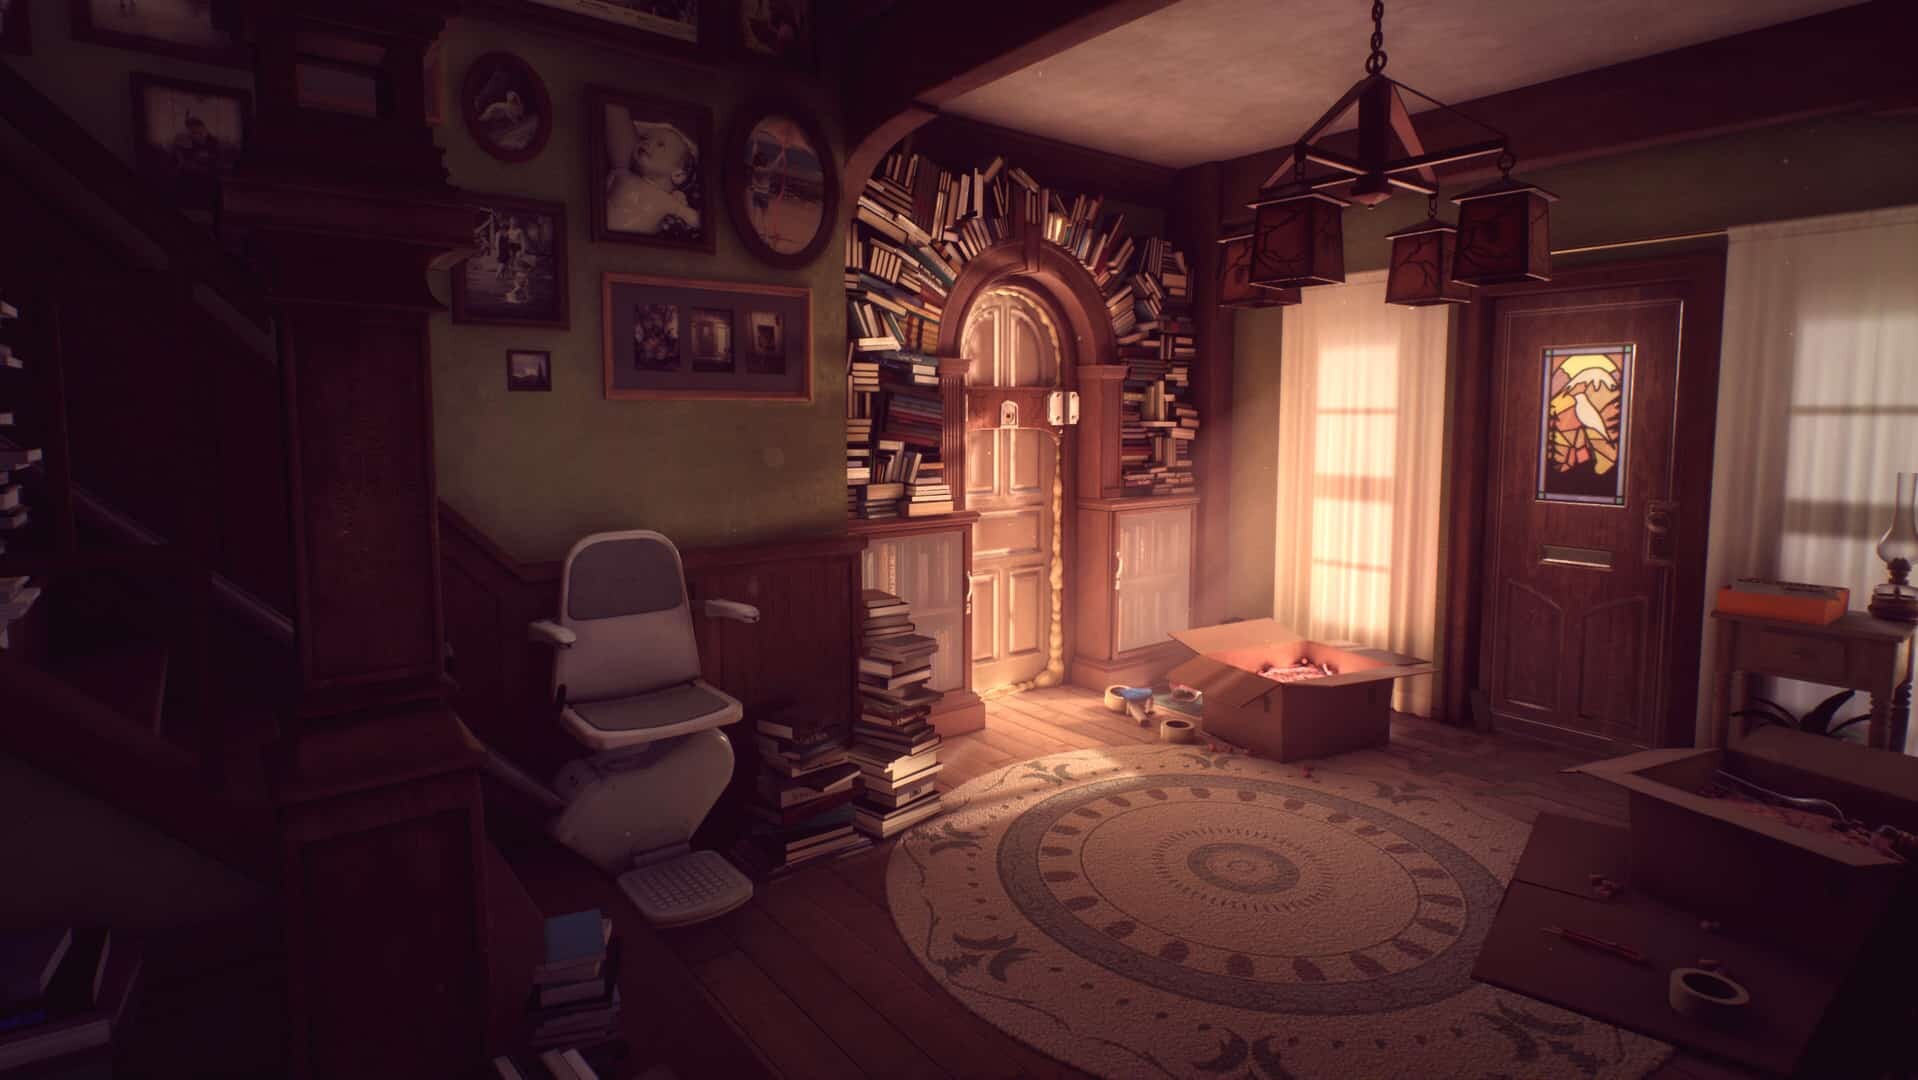 What Remains of Edith Finch game screenshot courtesy Steam